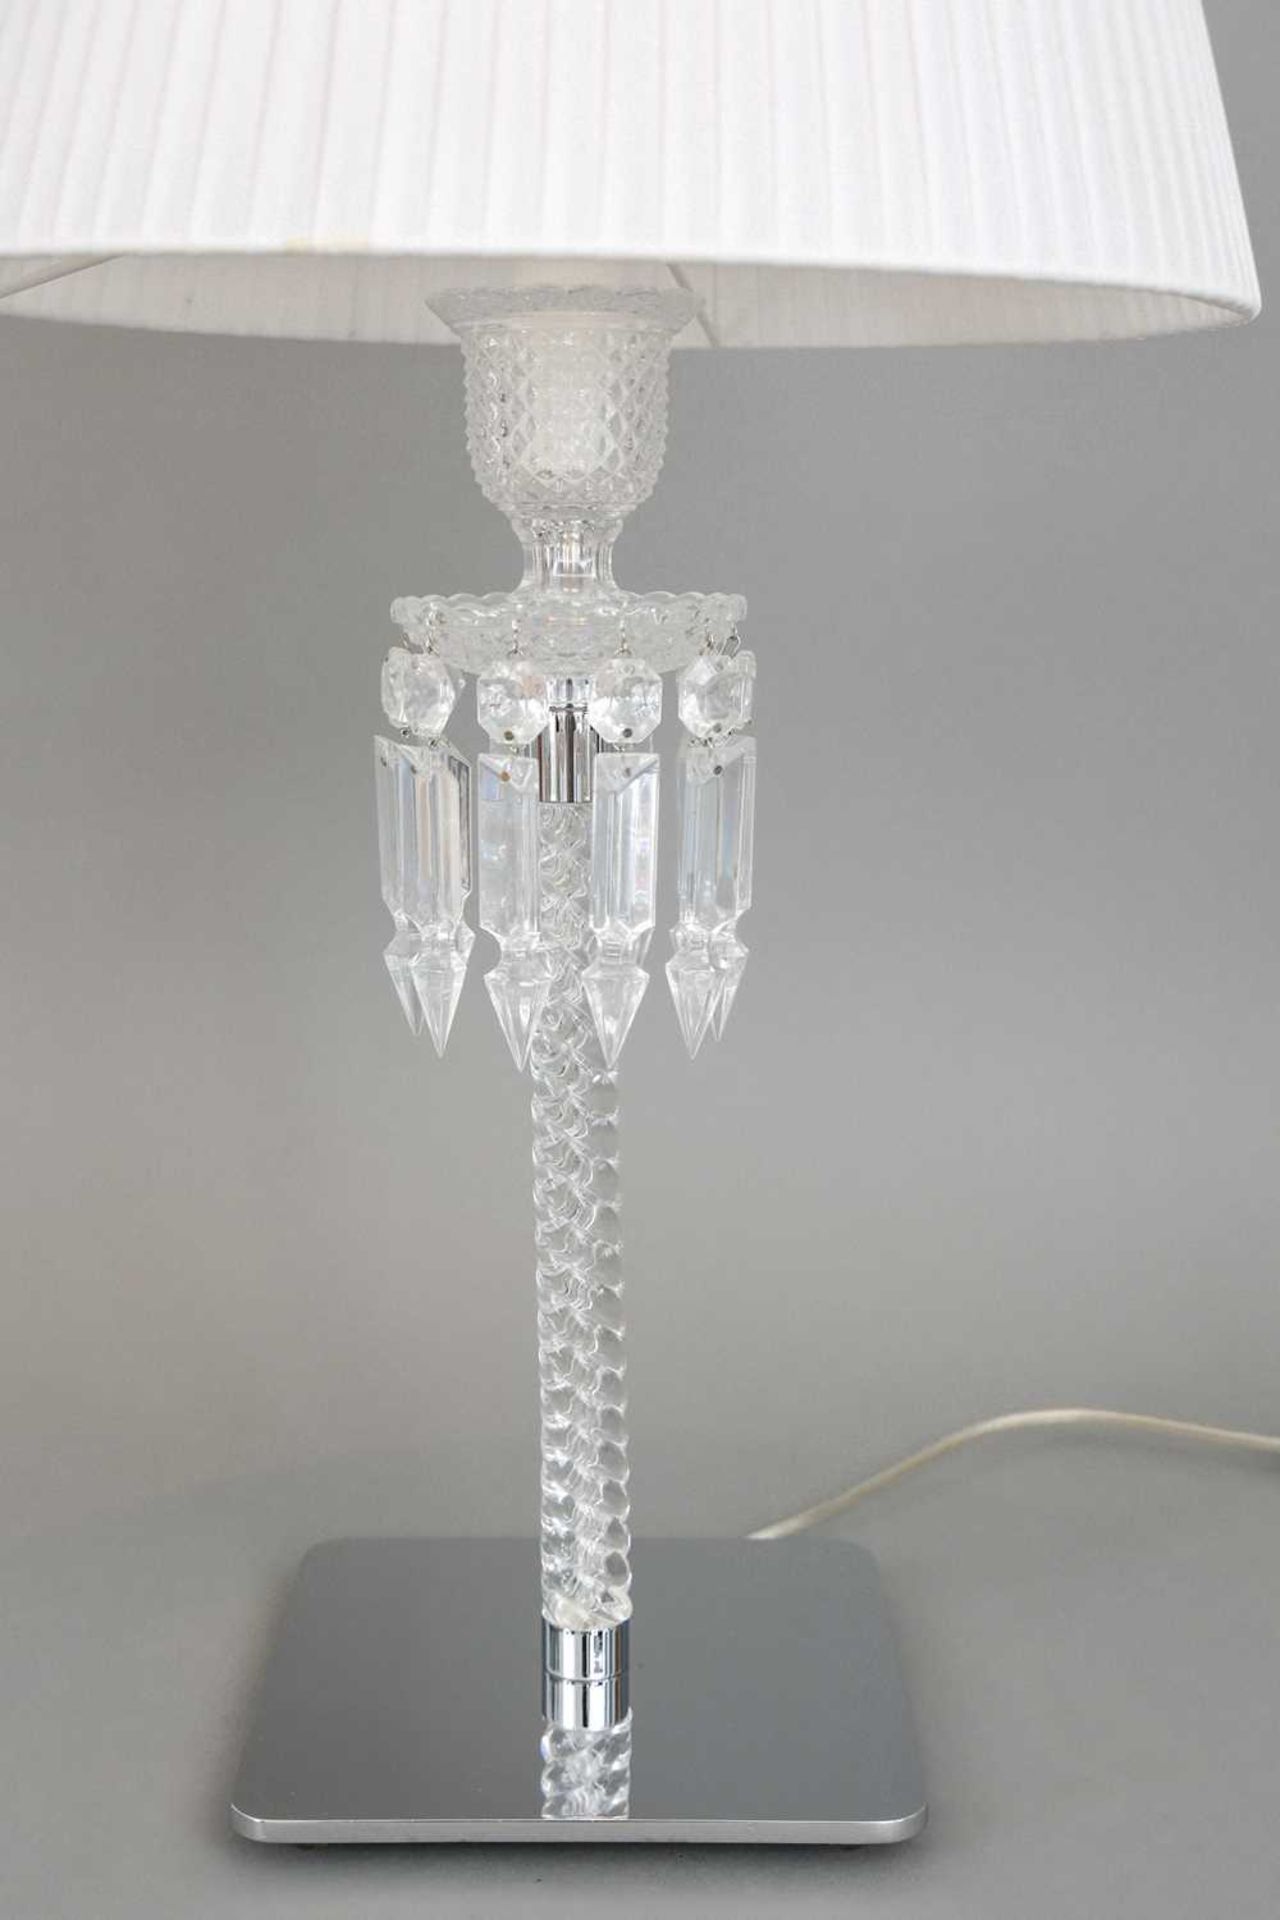 BACCARAT (France) Tischlampe "Torch" - Image 2 of 4